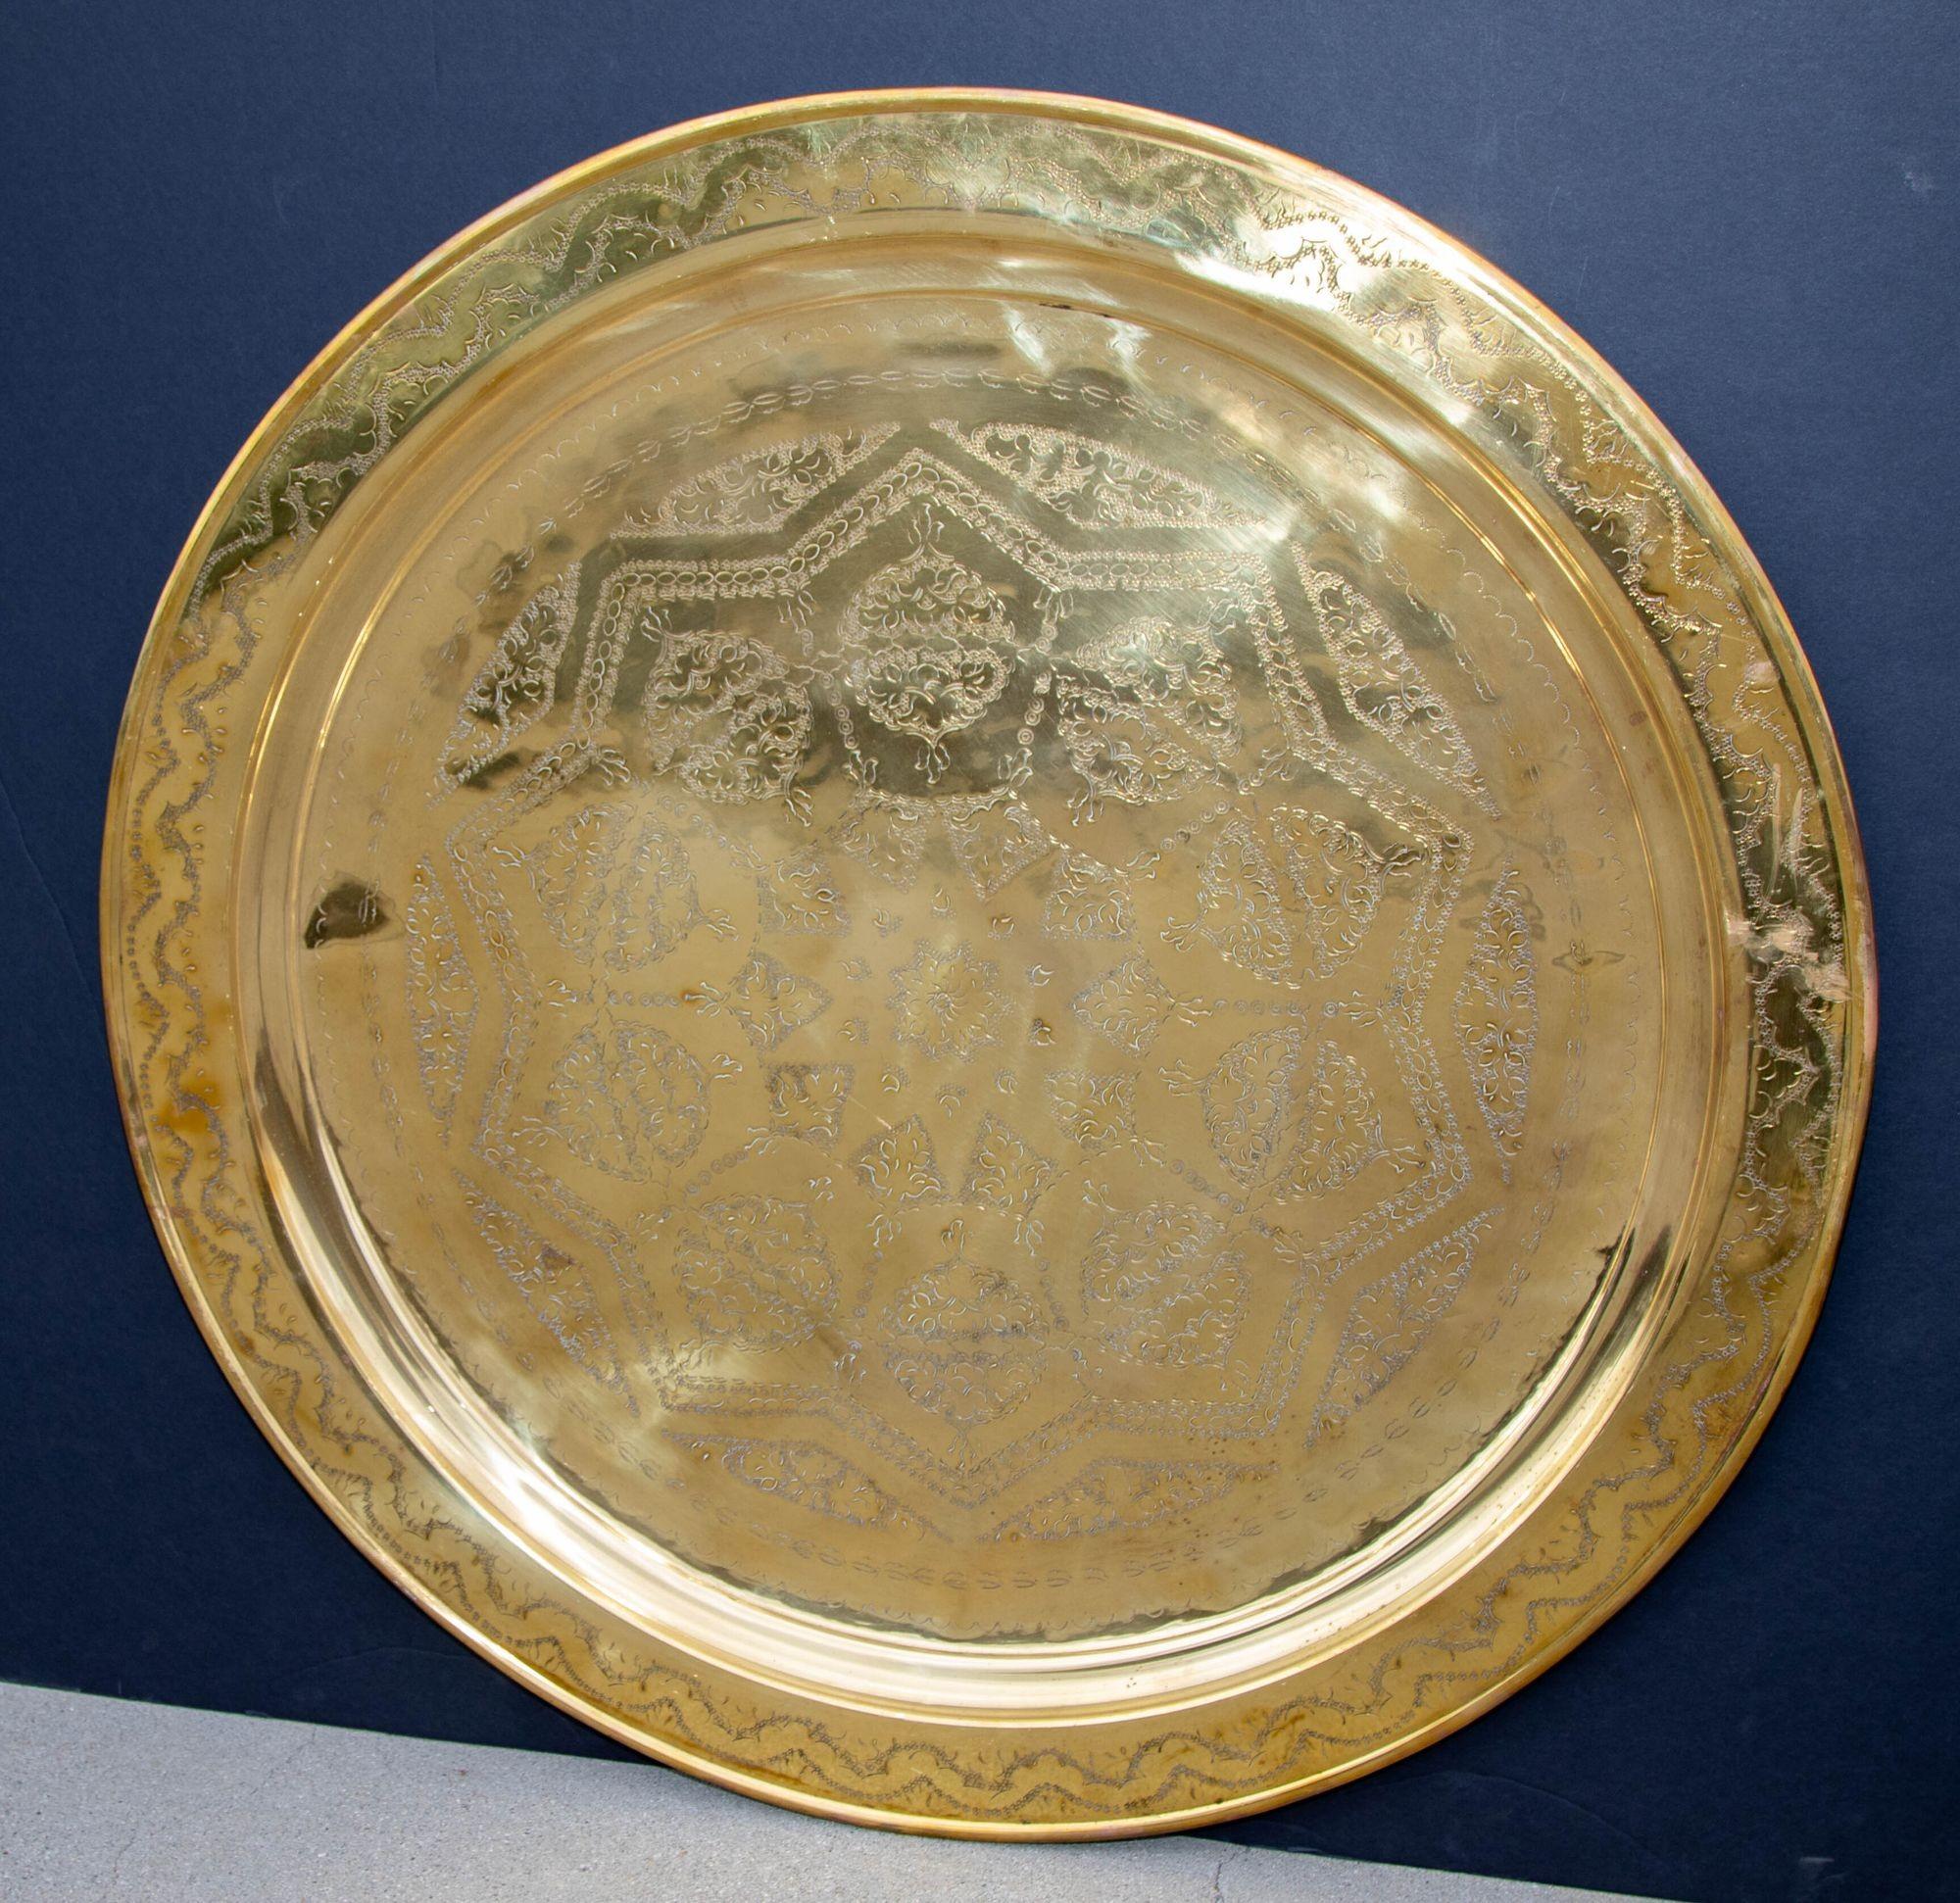 Antique Oversized Round Moroccan Polished Brass Tray Platter 19th C. For Sale 2